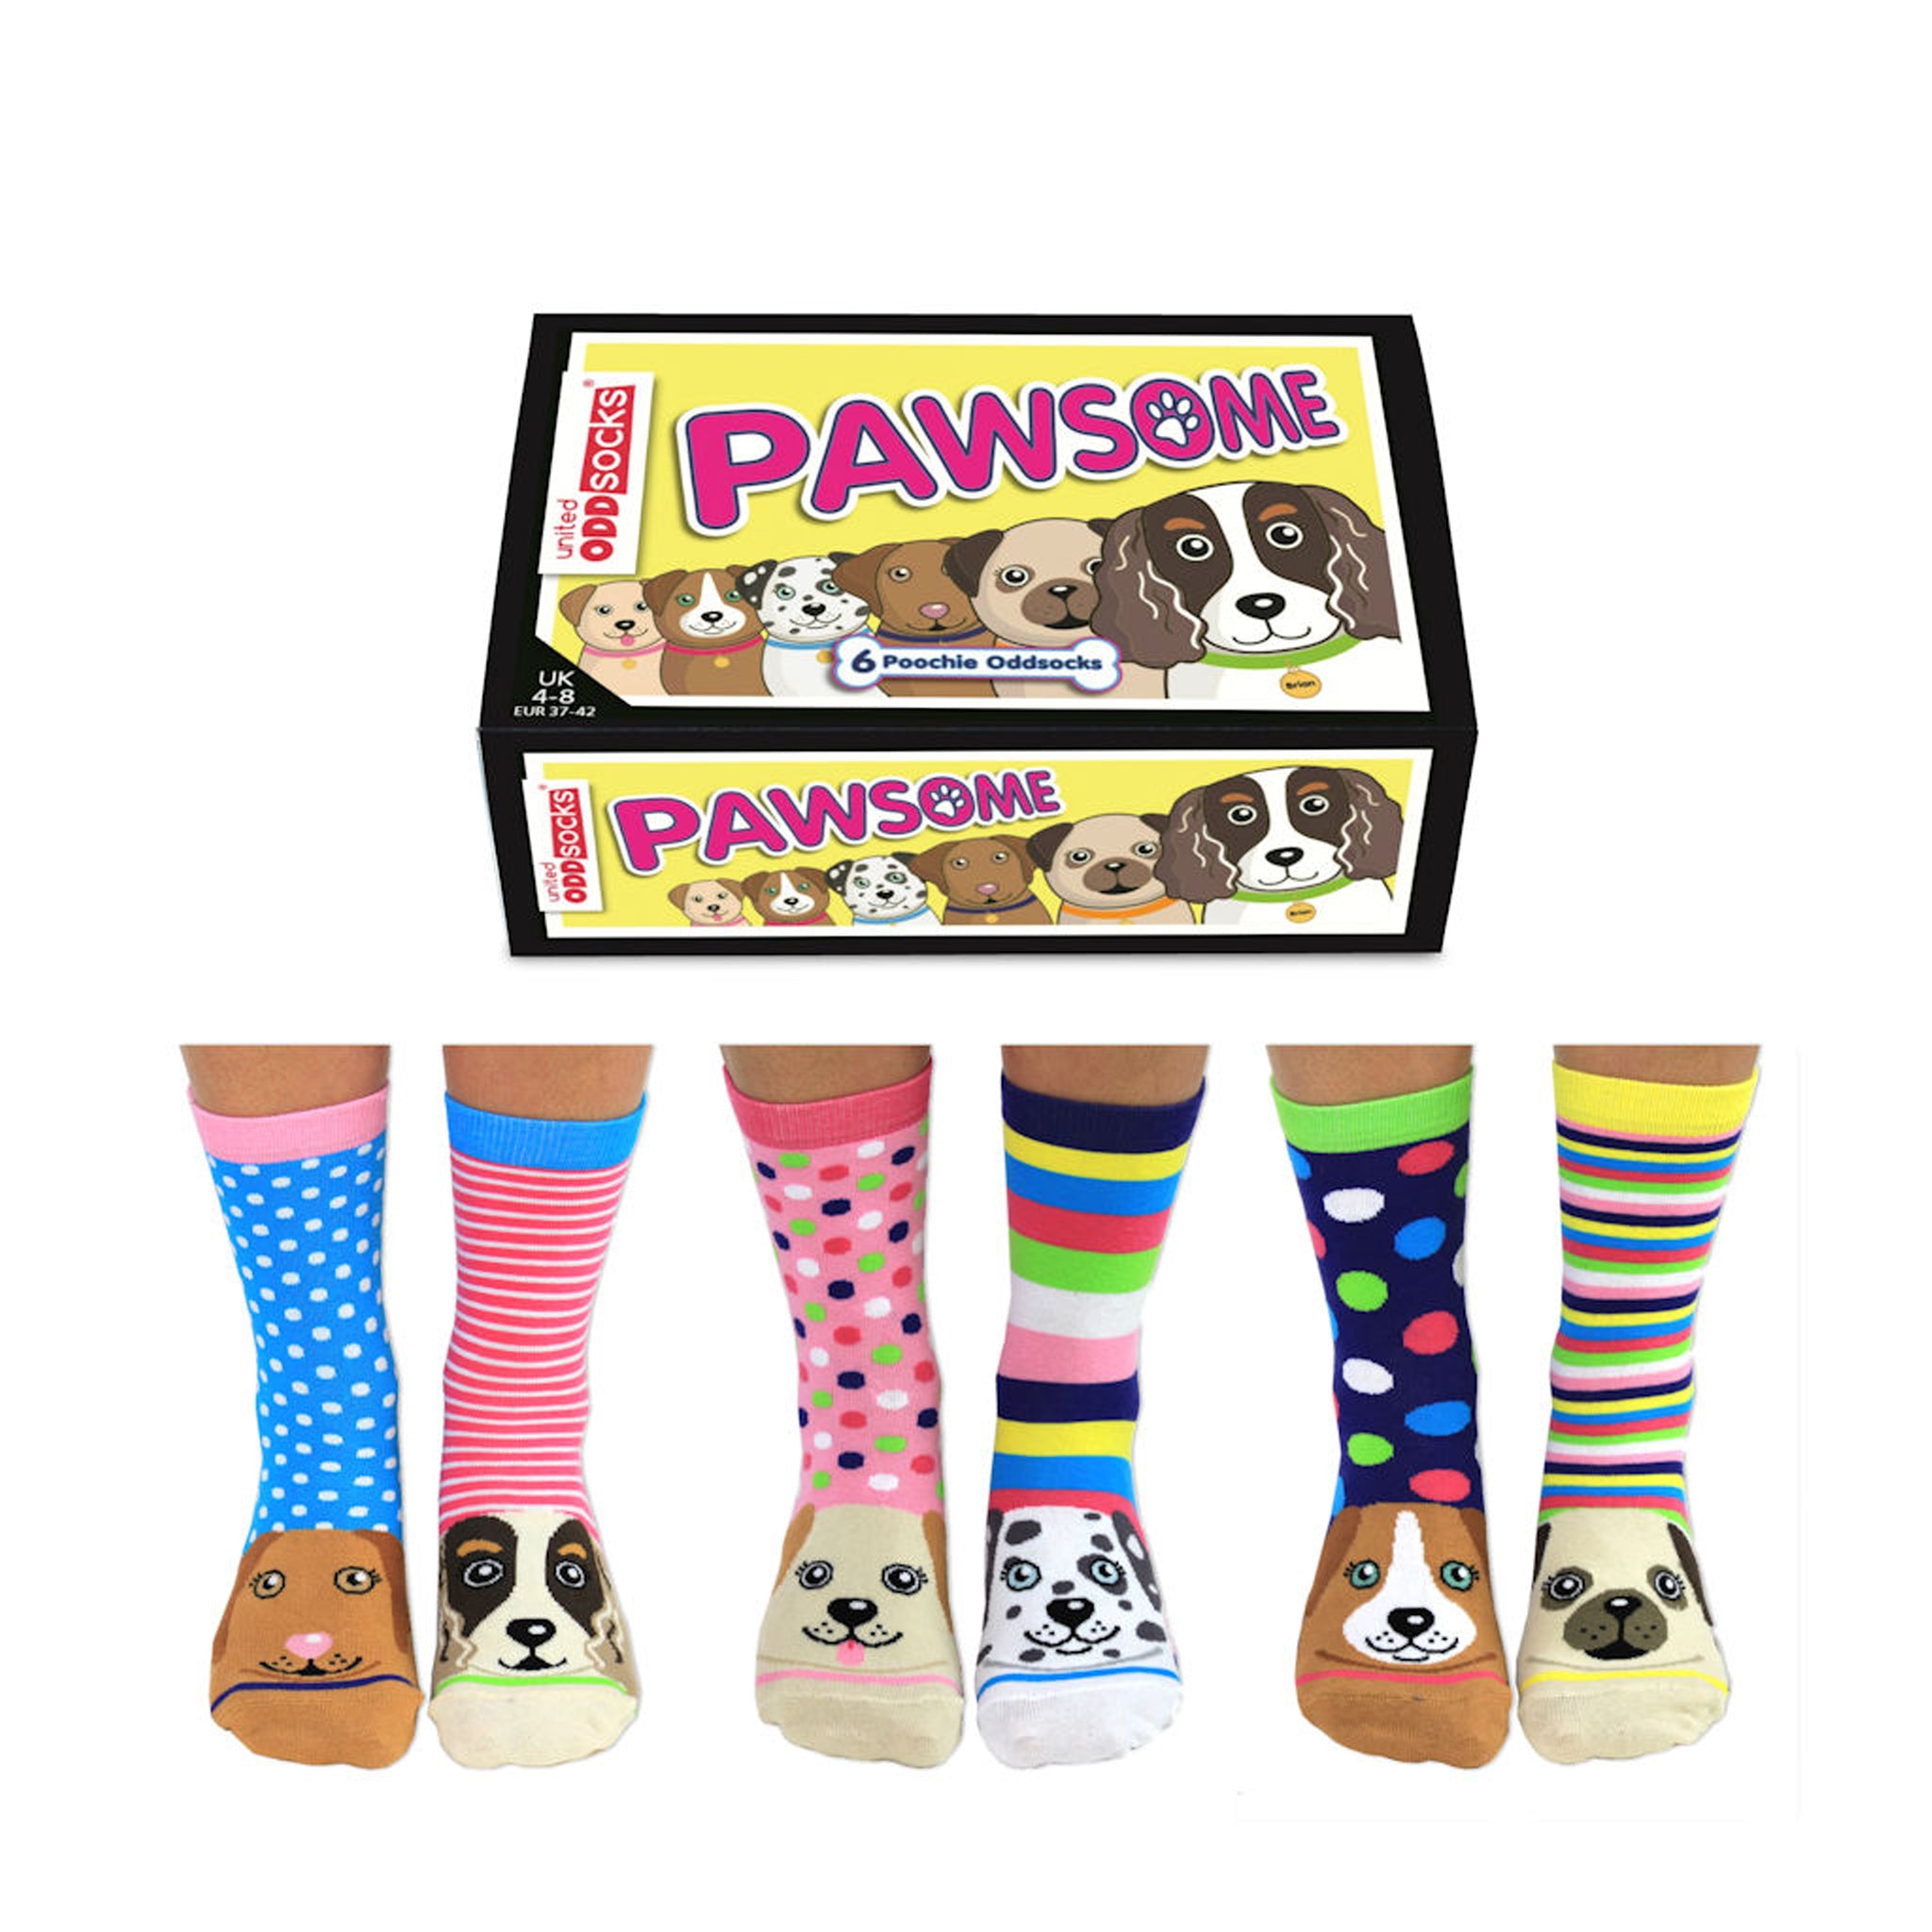 A box is decorated with illustrations of six dogs and reads "Pawsome". Underneath are pictures of three pairs of feet, all with different sock designs on. 